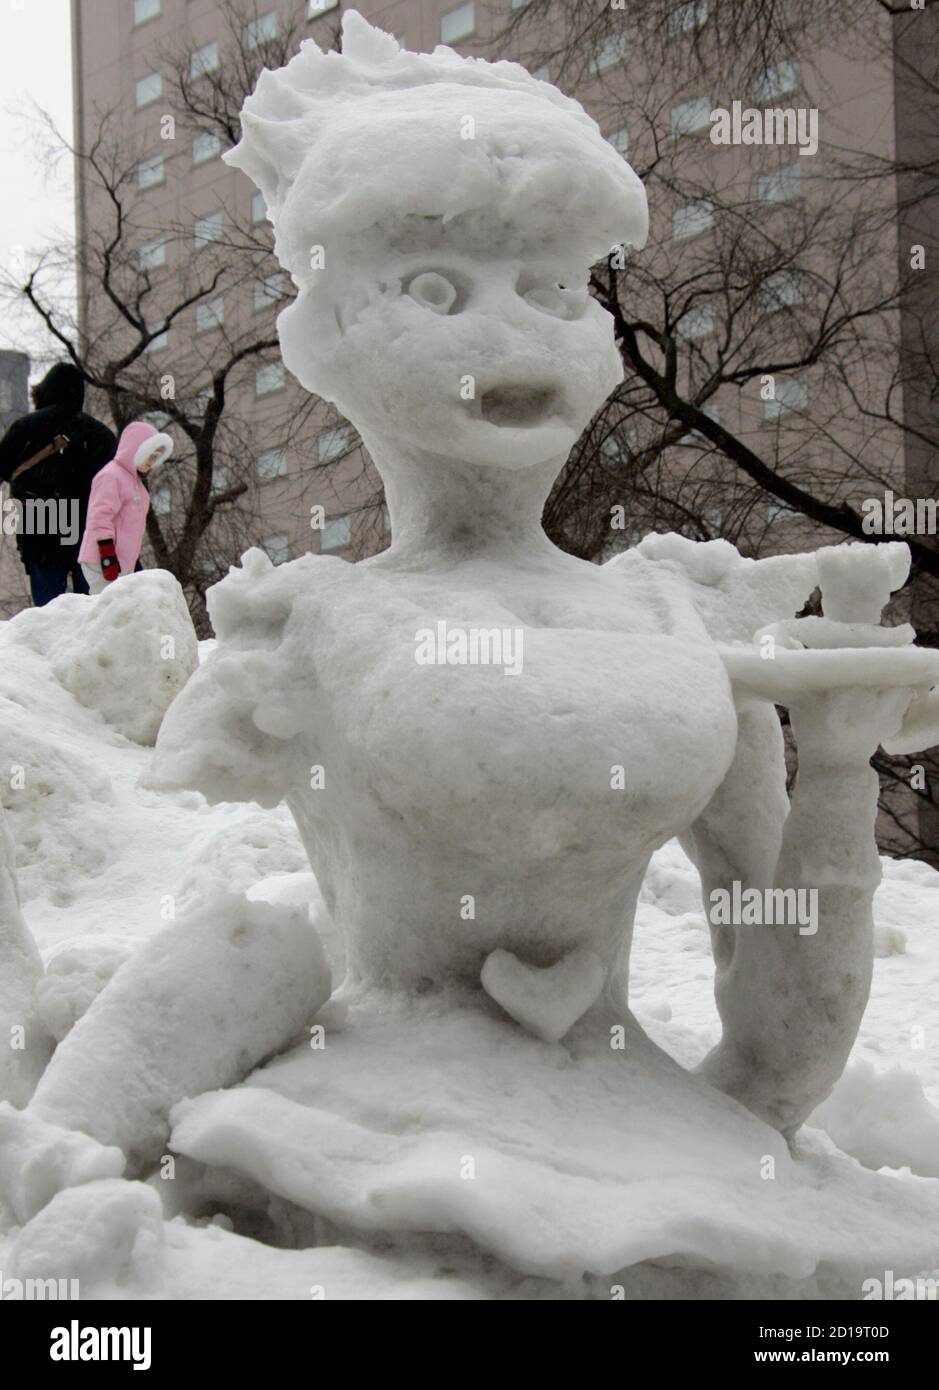 A partially melted mermaid-shaped snow sculpture is displayed at the  Sapporo Snow Festival in Sapporo, northern Japan February 6, 2007.  Undaunted by unseasonably high temperatures and rain, the Sapporo Snow  Festival, one